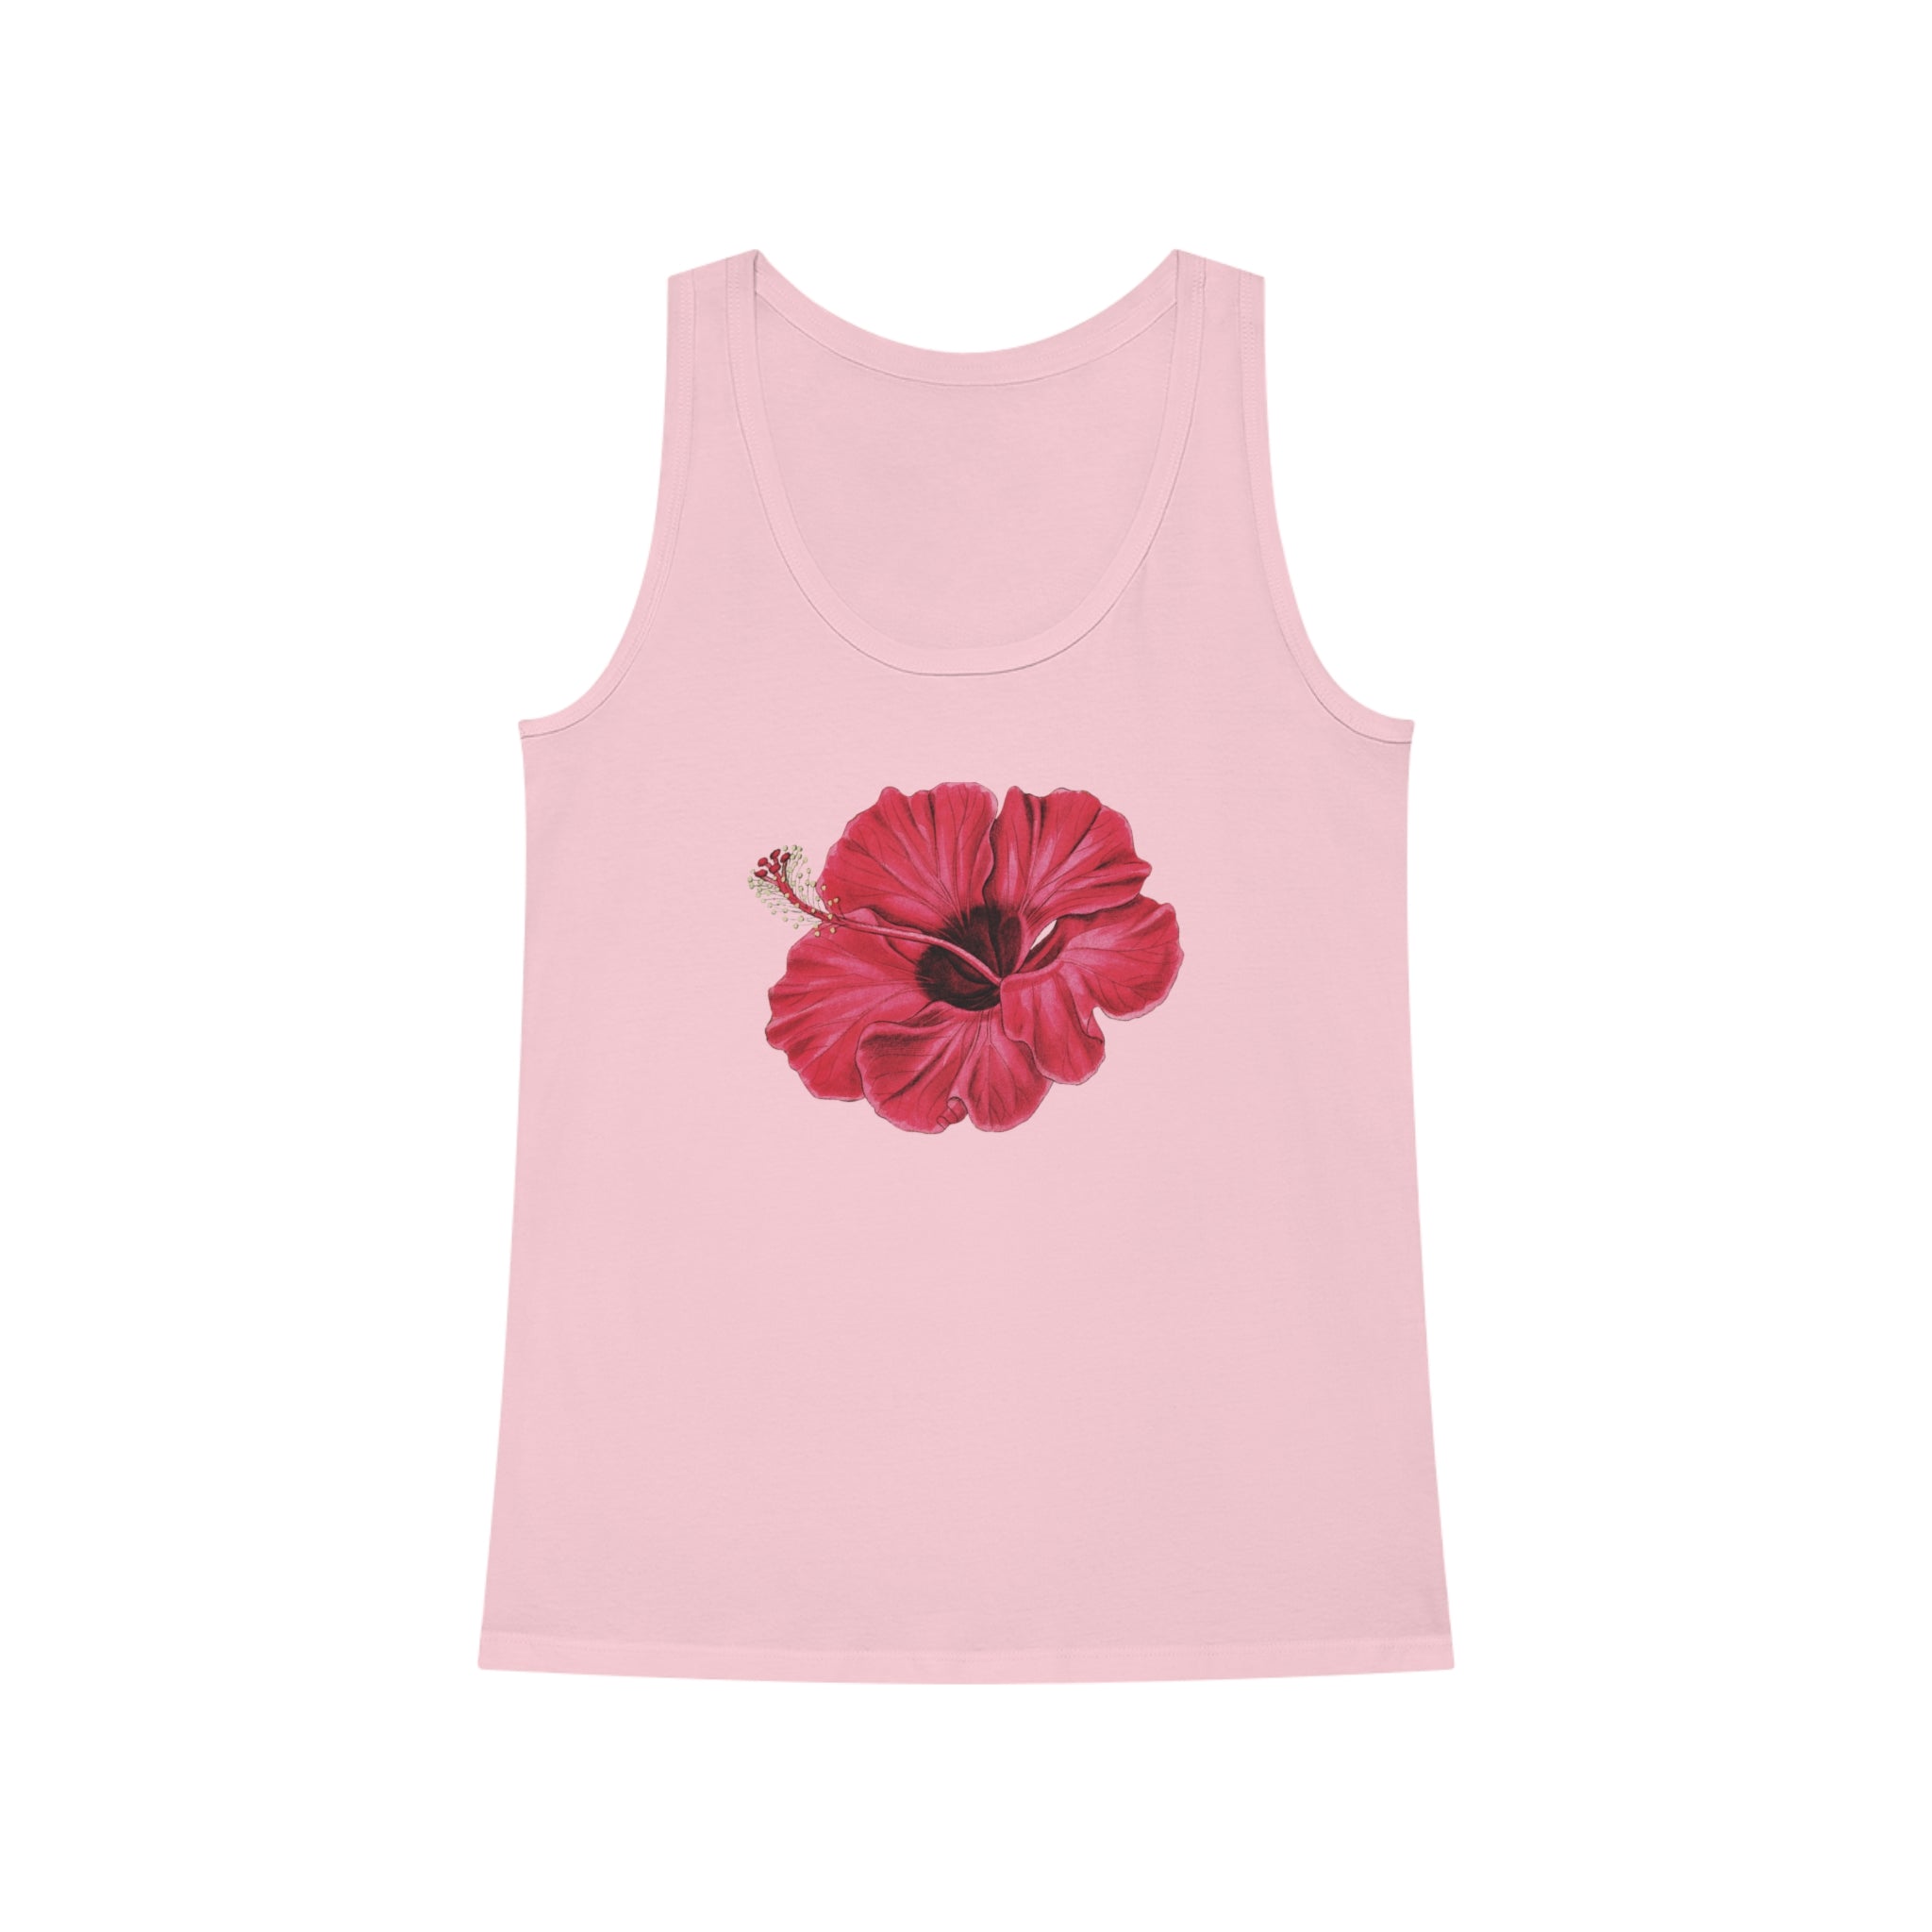 A pink Flower Red Tank Top with a hibiscus flower on it.